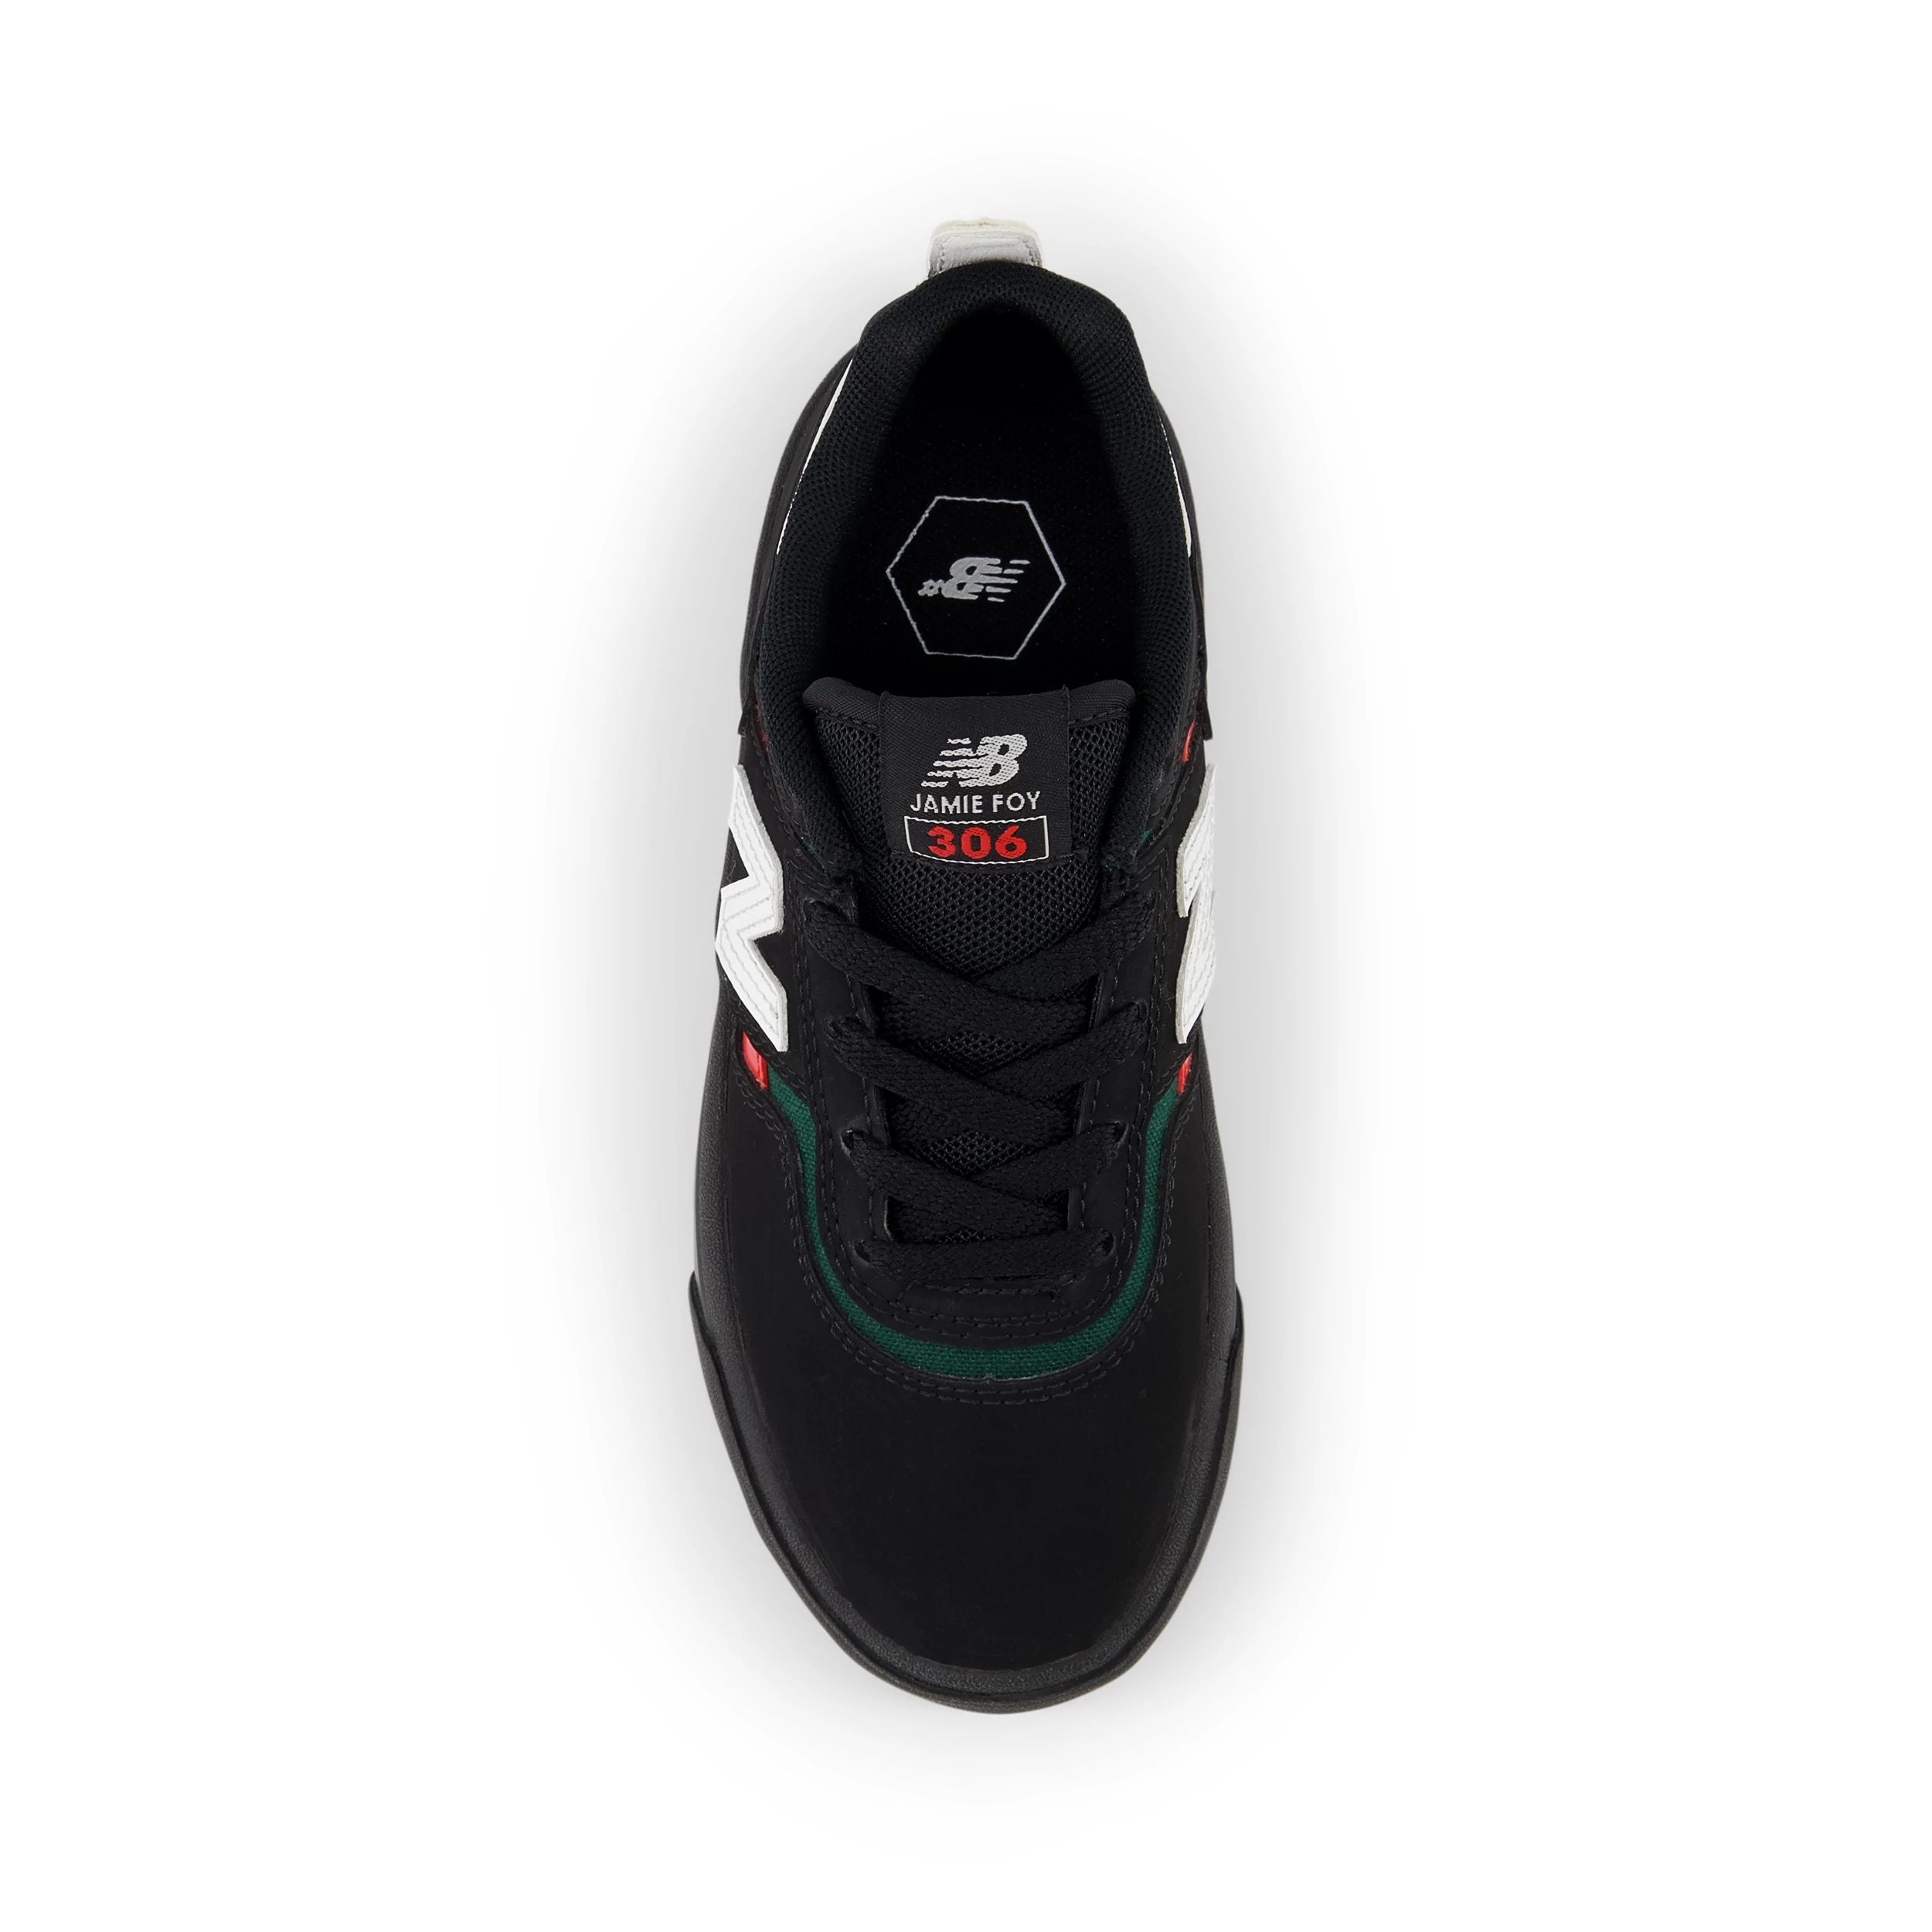 Black/Red Youth Jamie Foy NM306 NB Numeric Skate Shoe Top